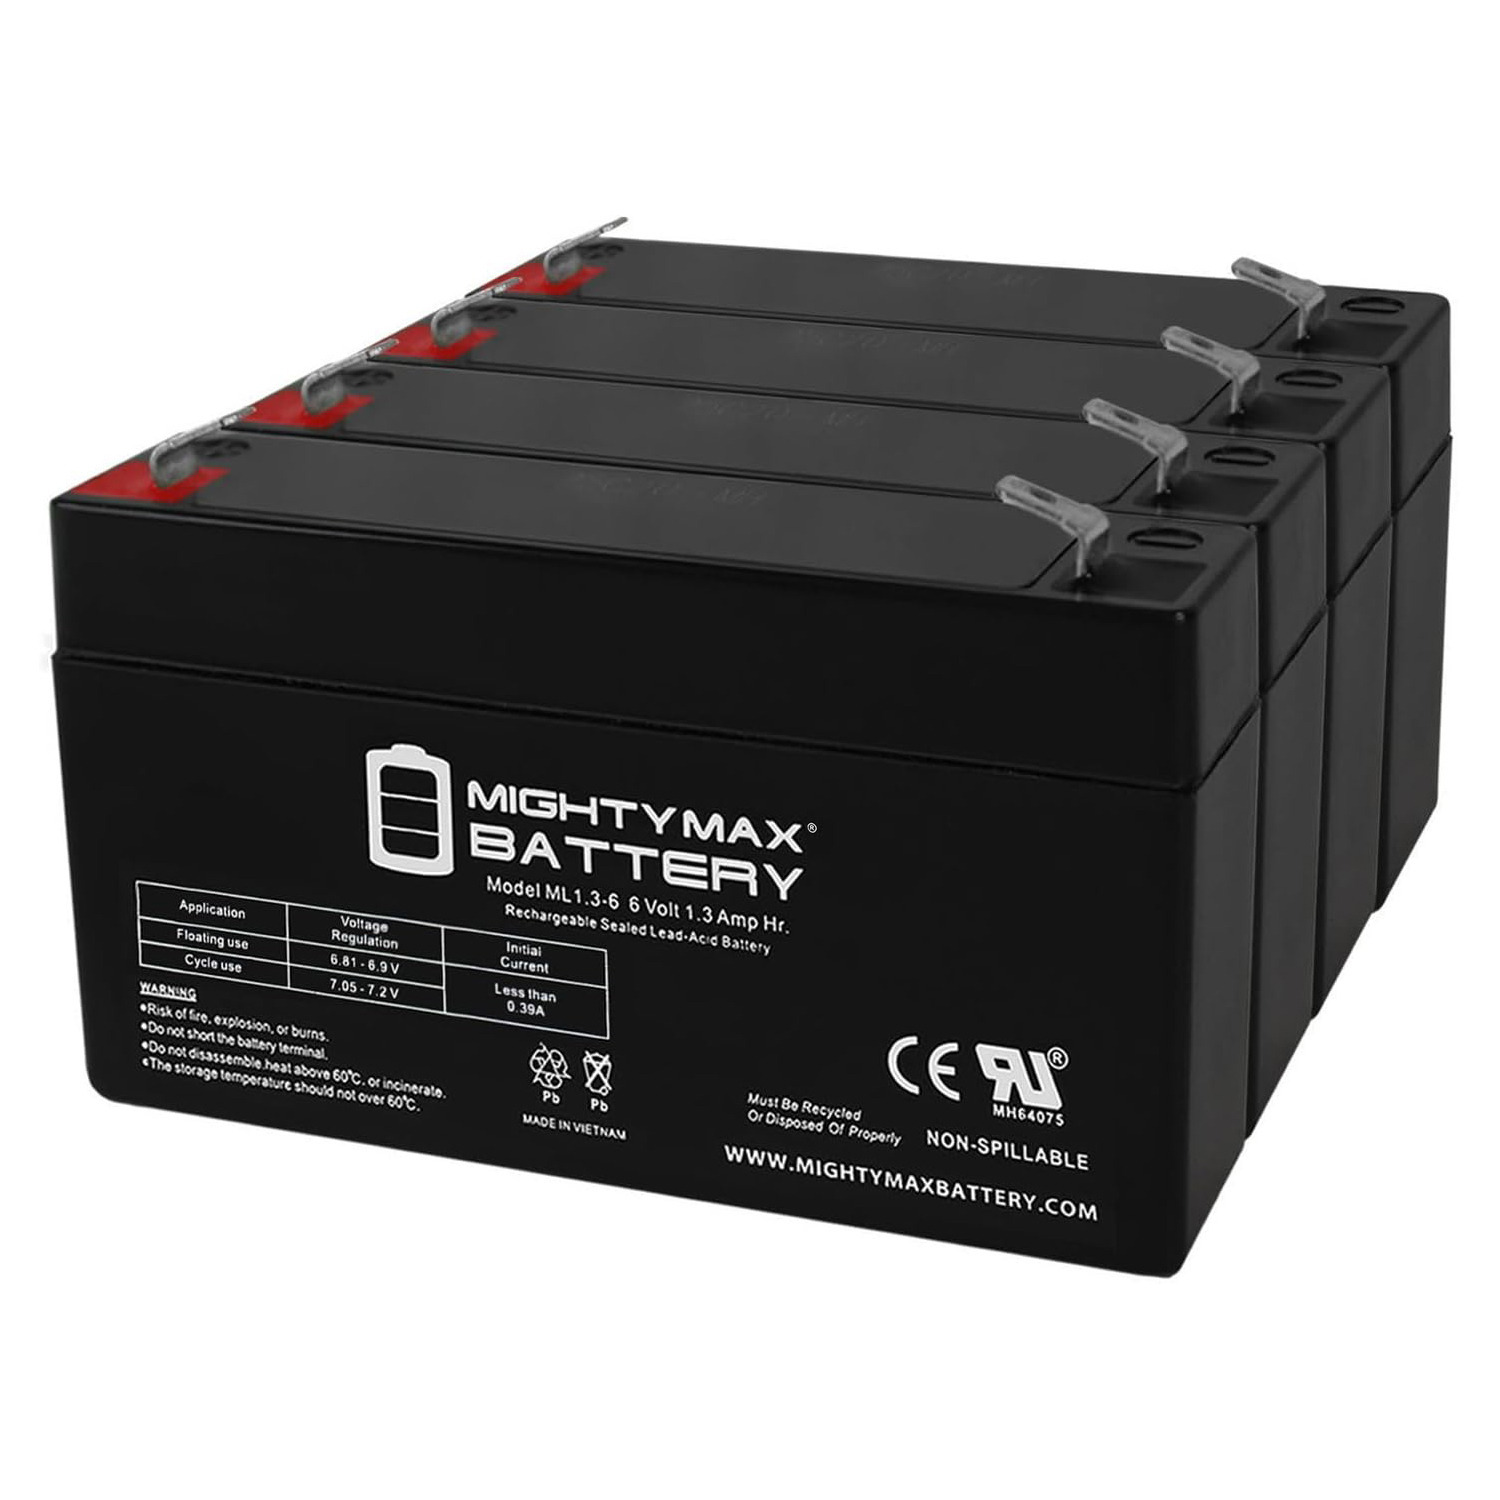 6V 1.3Ah SLA Replacement Battery for Intellipower ital PS612 - 4 Pack